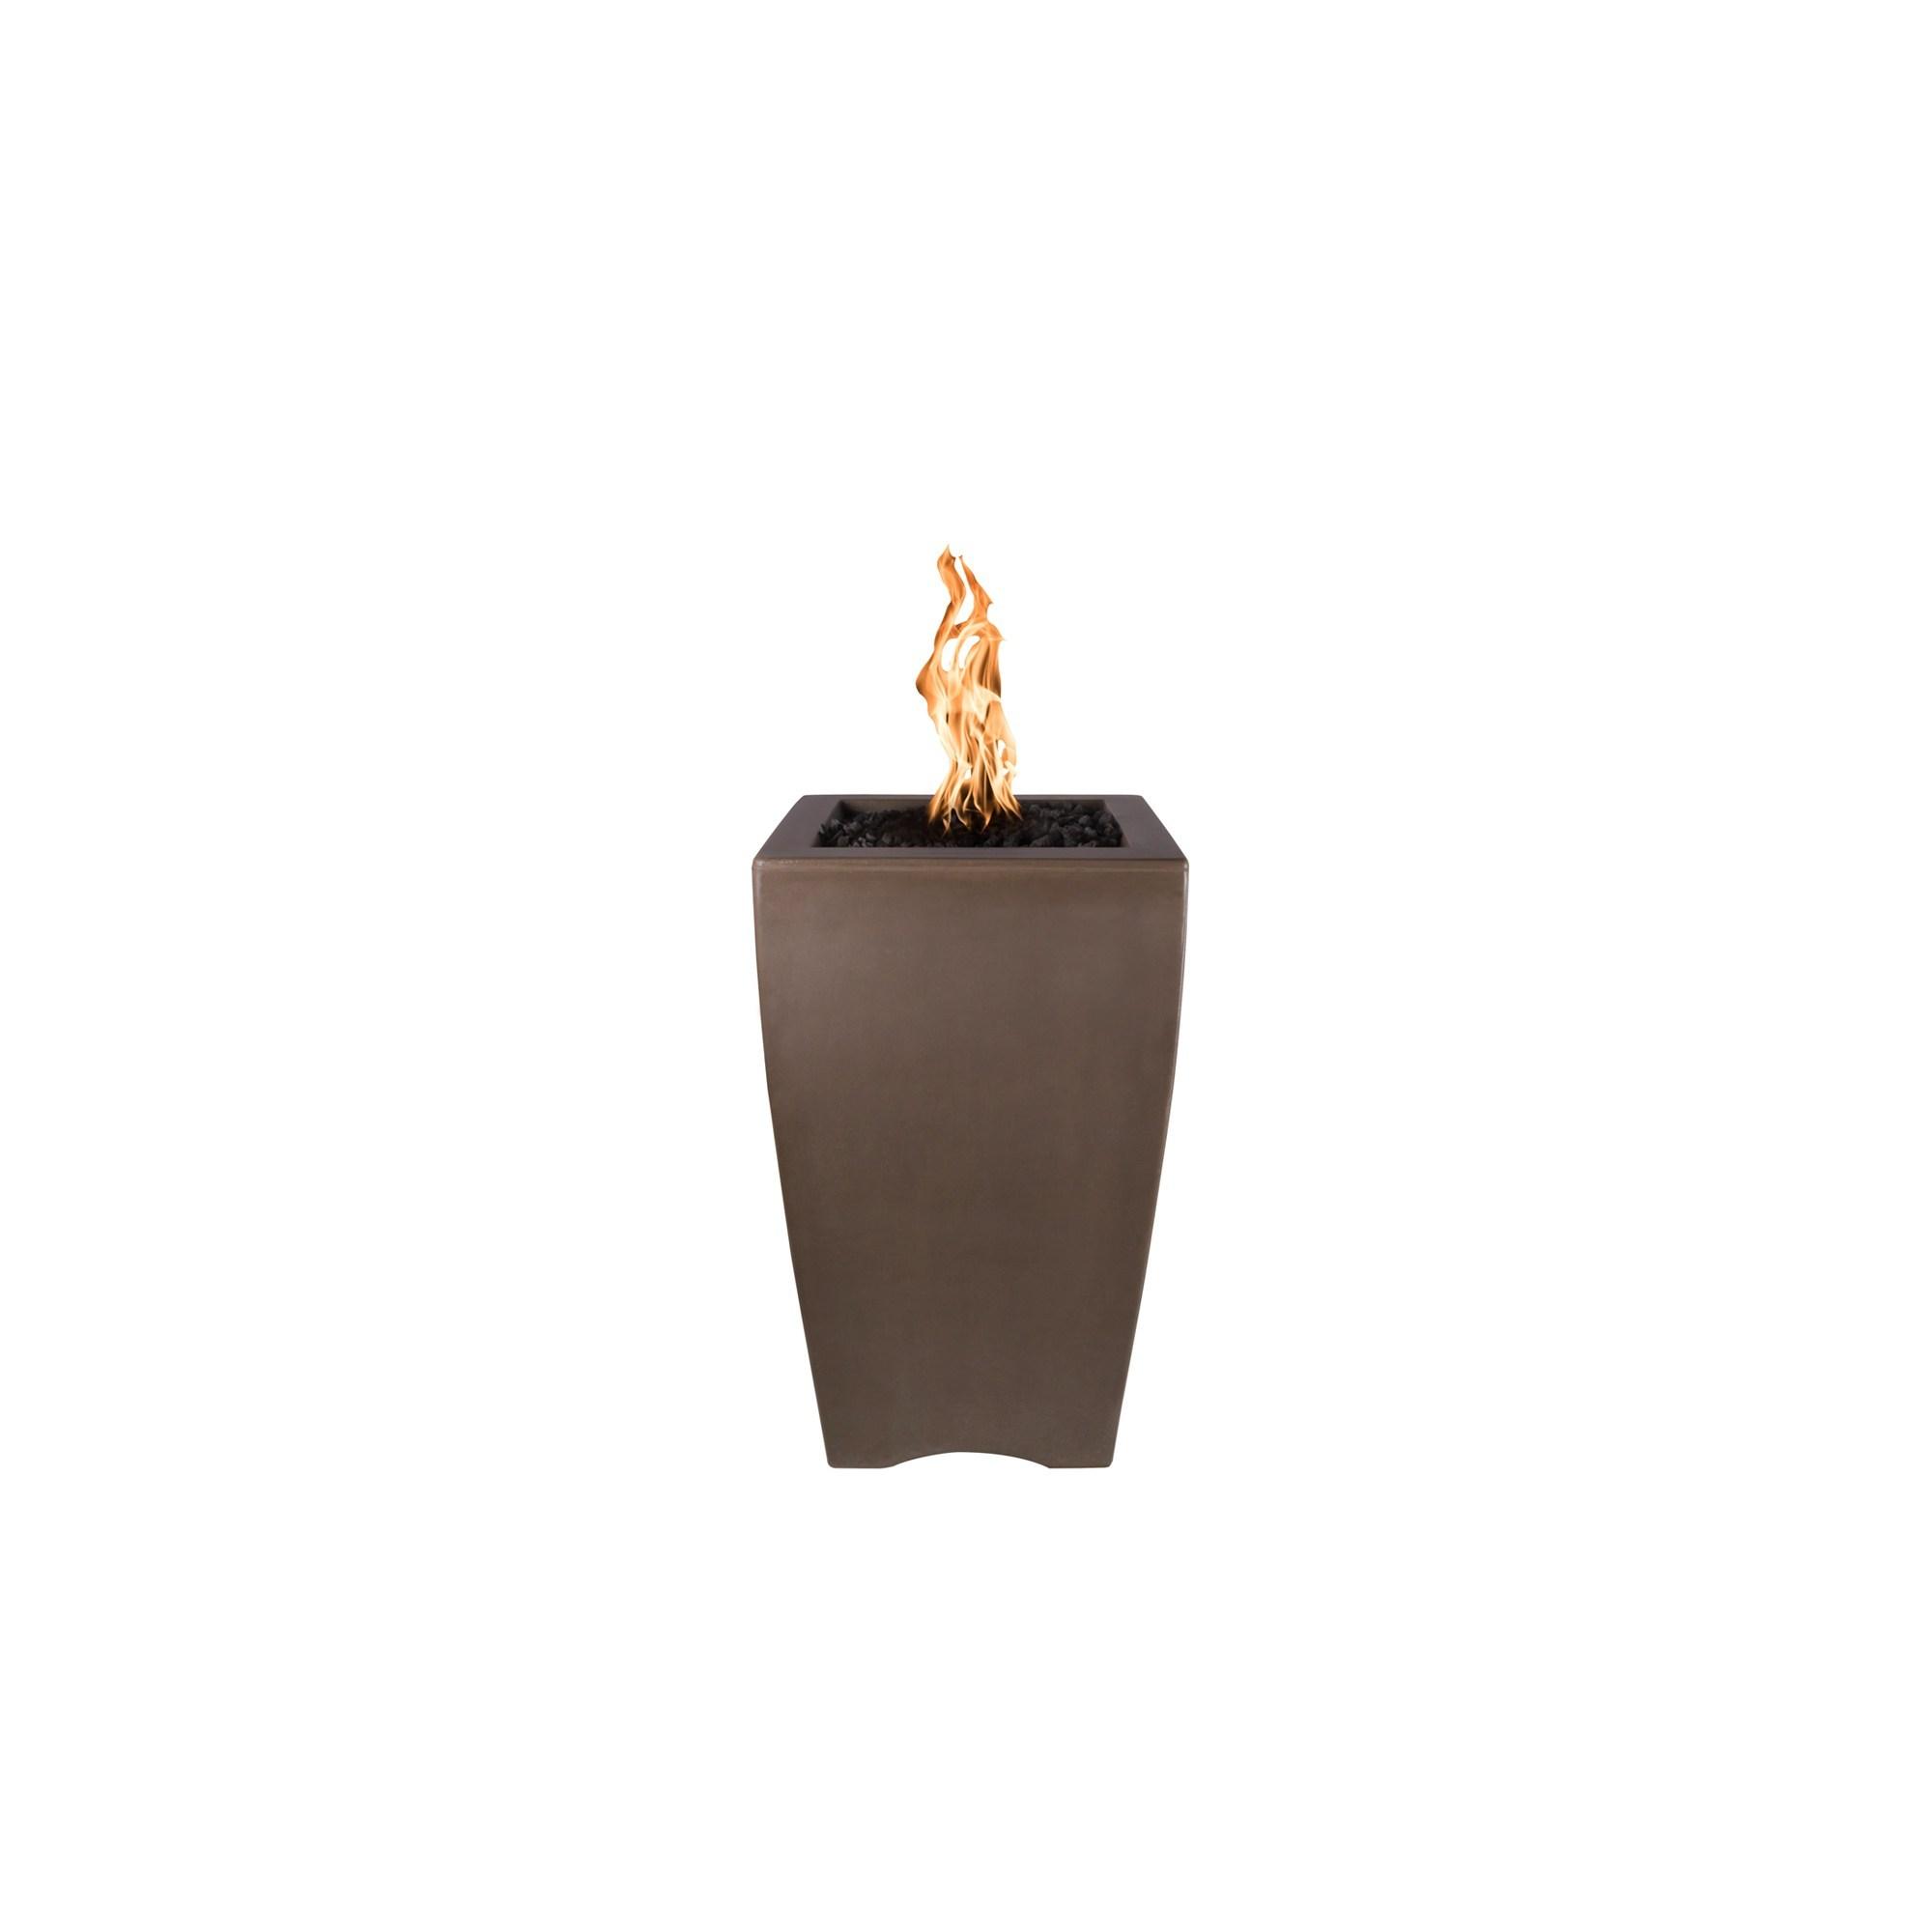 Baston Concrete Pillar Fire Pit With, Fire Pit With Door